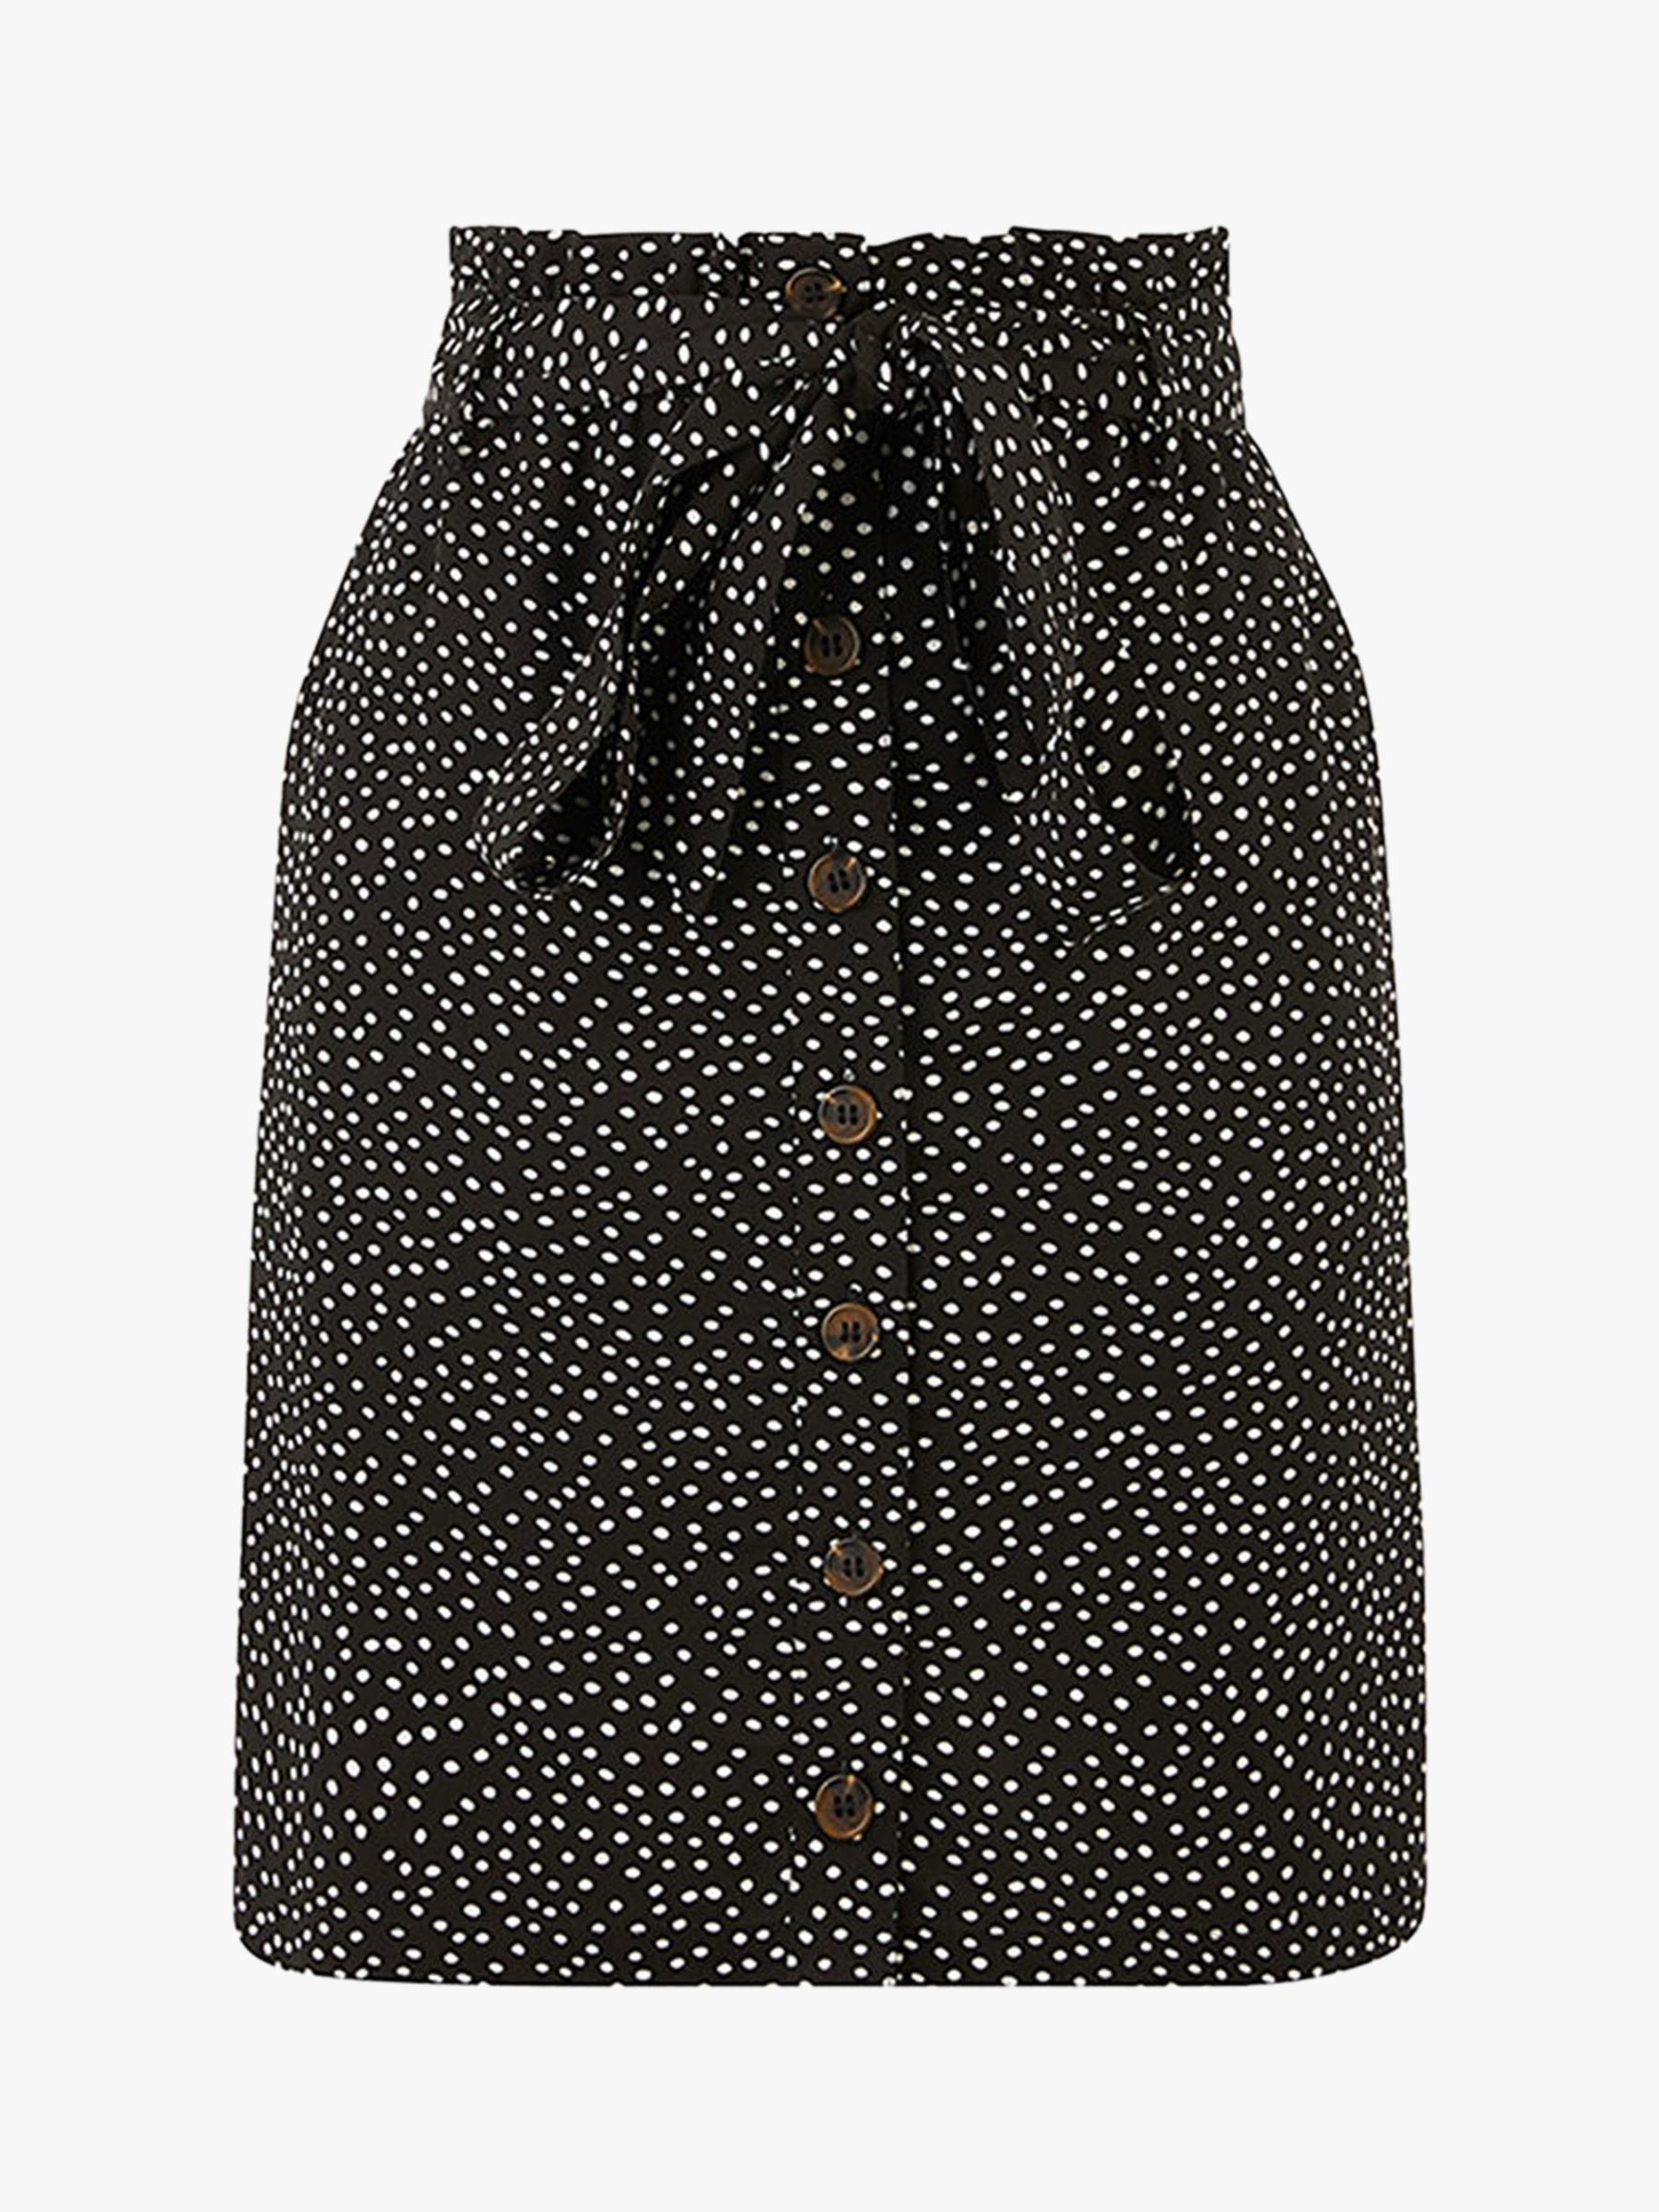 Oasis Crushed Spot Button Skirt, Black/White